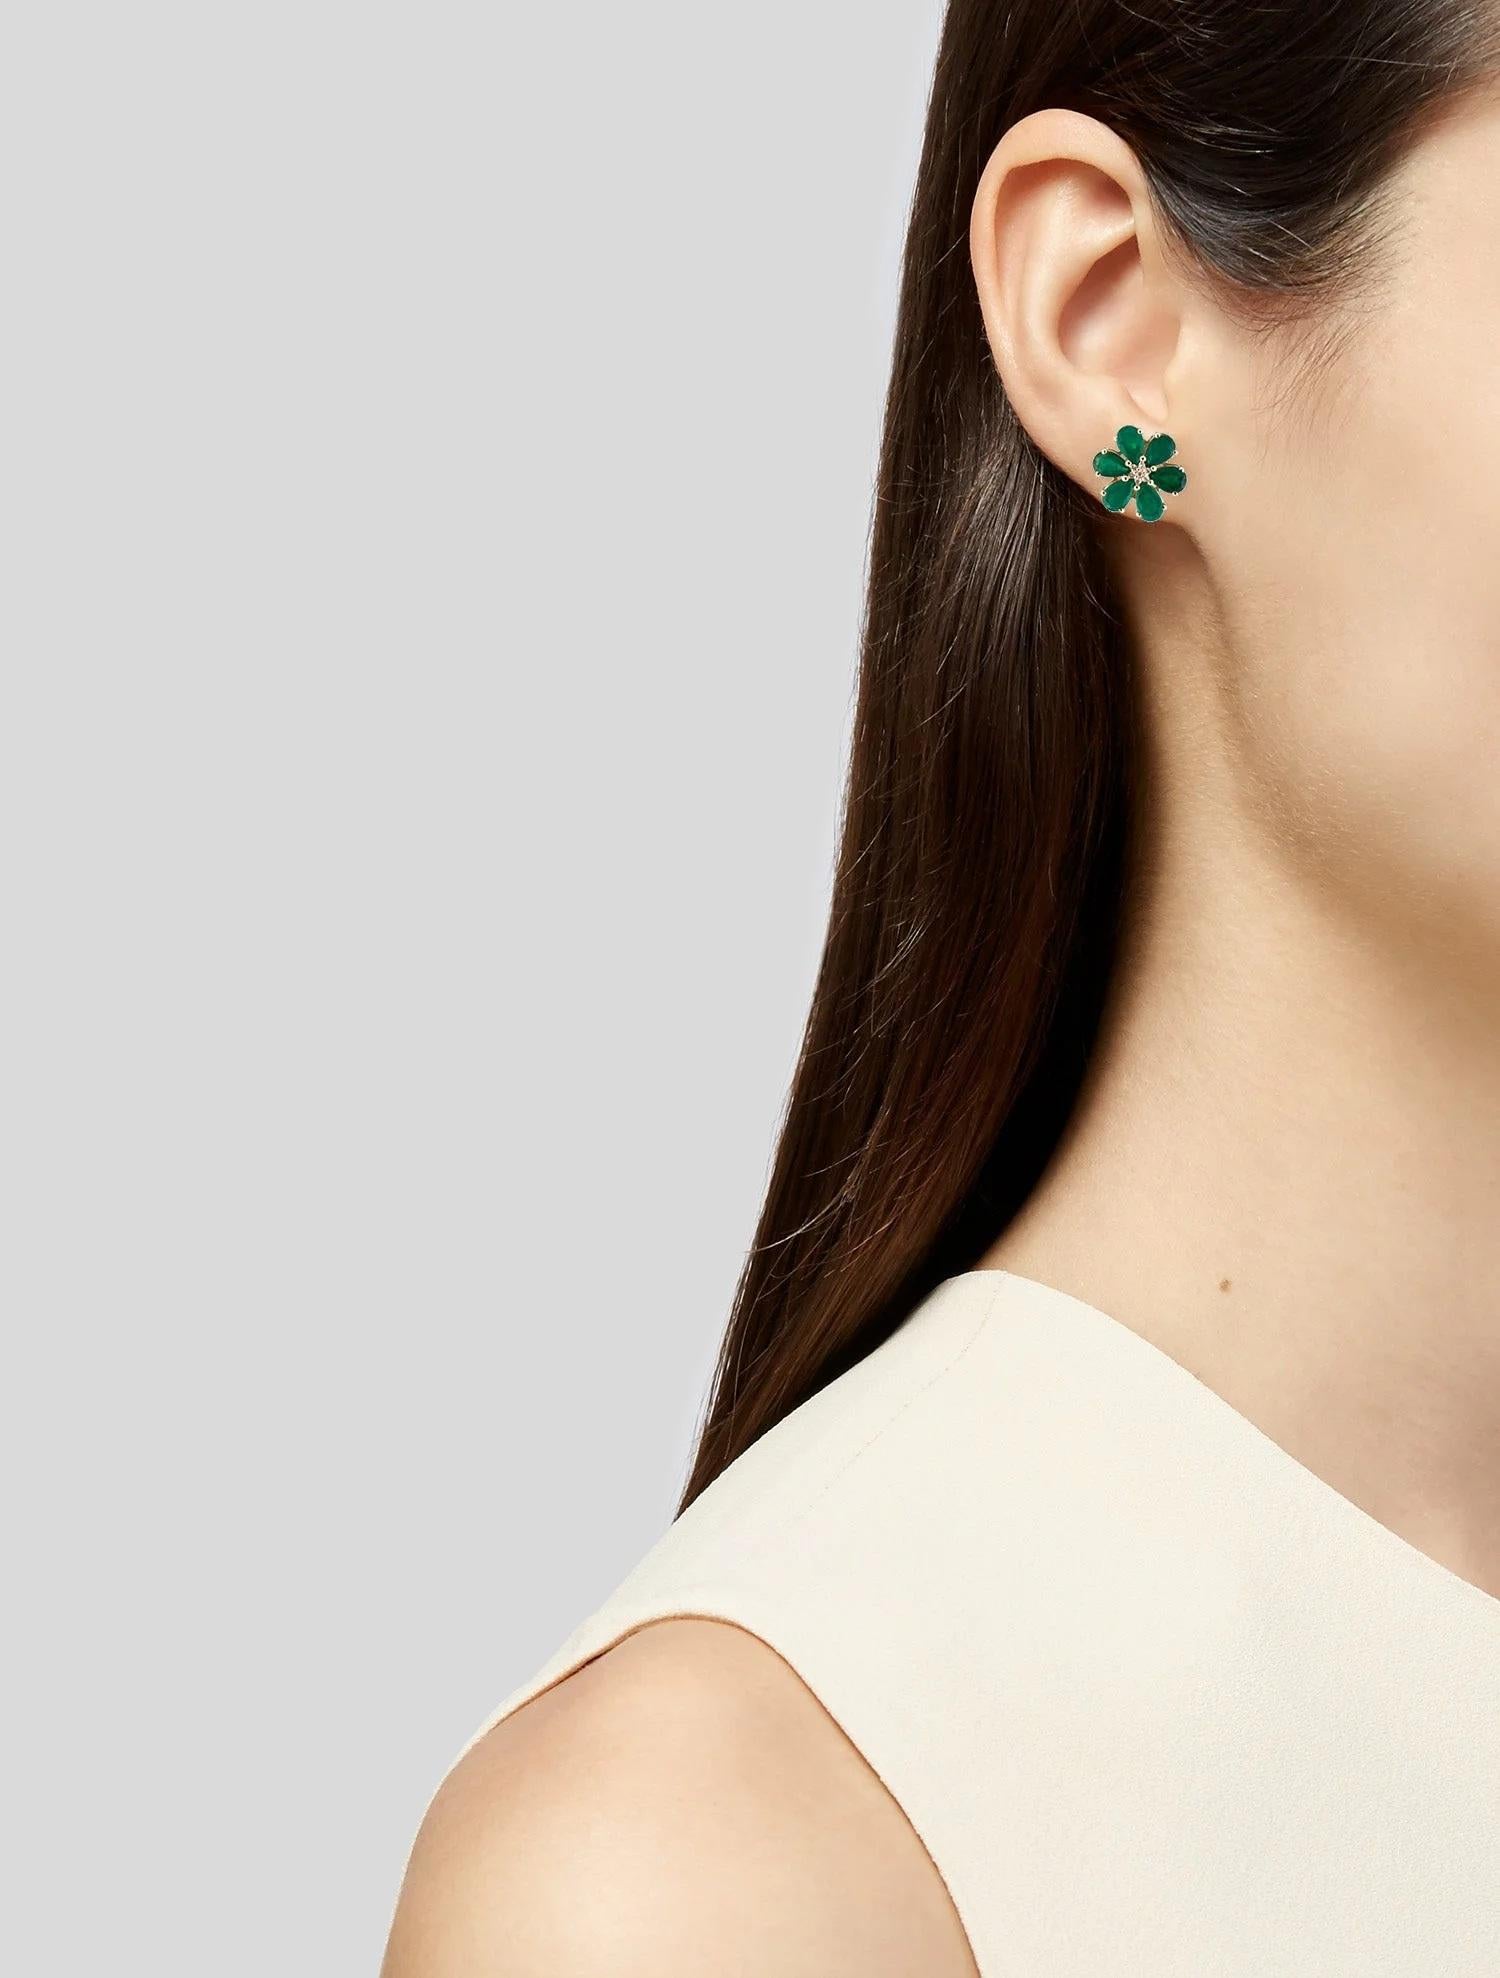 Discover the epitome of elegance with these stunning 14K yellow gold earrings, featuring a remarkable 4.03 carat pear modified brilliant emerald, beautifully complemented by the sparkle of near colorless diamonds. These earrings are a testament to